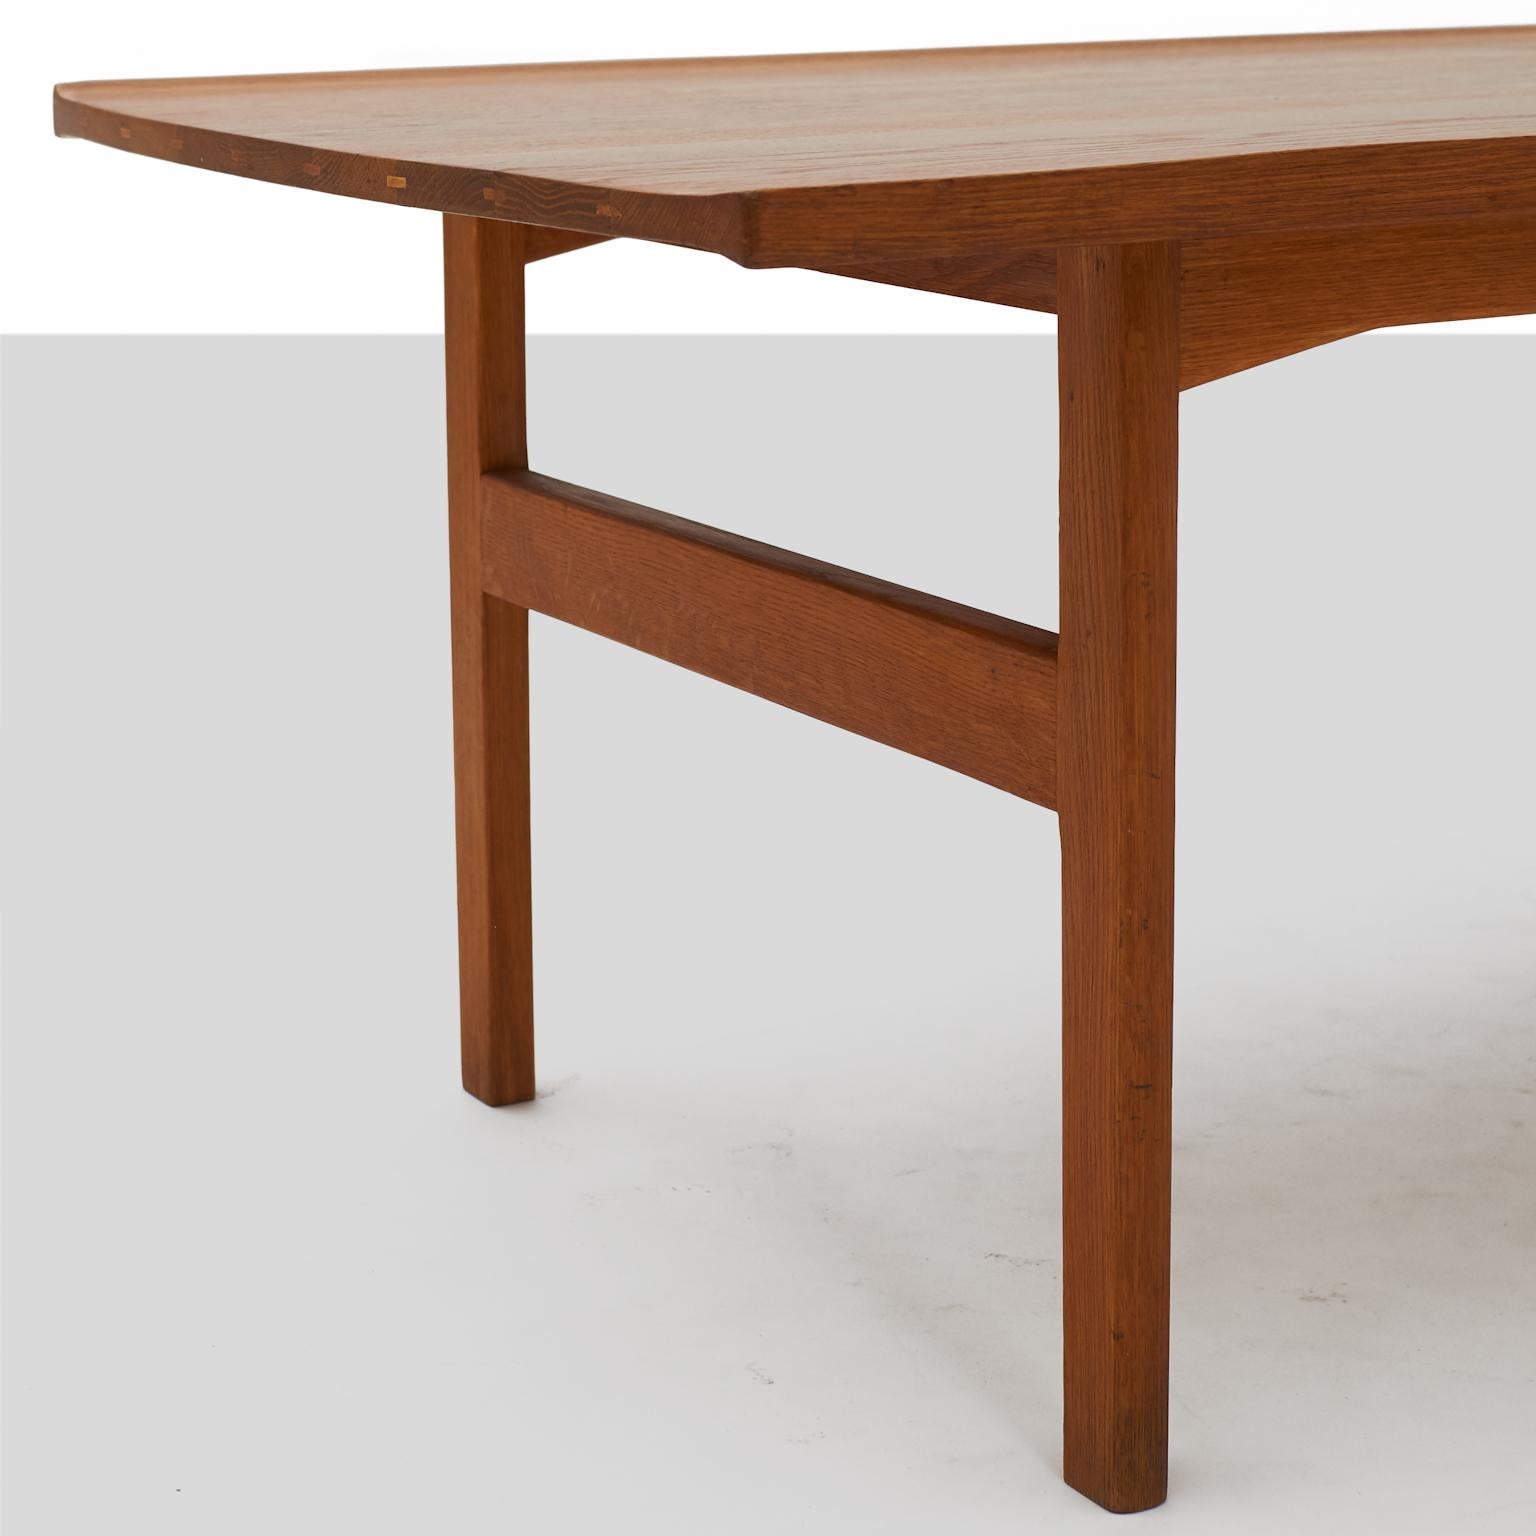 20th Century Long Teak Coffee Table by Tove & Edvard Kindt-Larsen For Sale